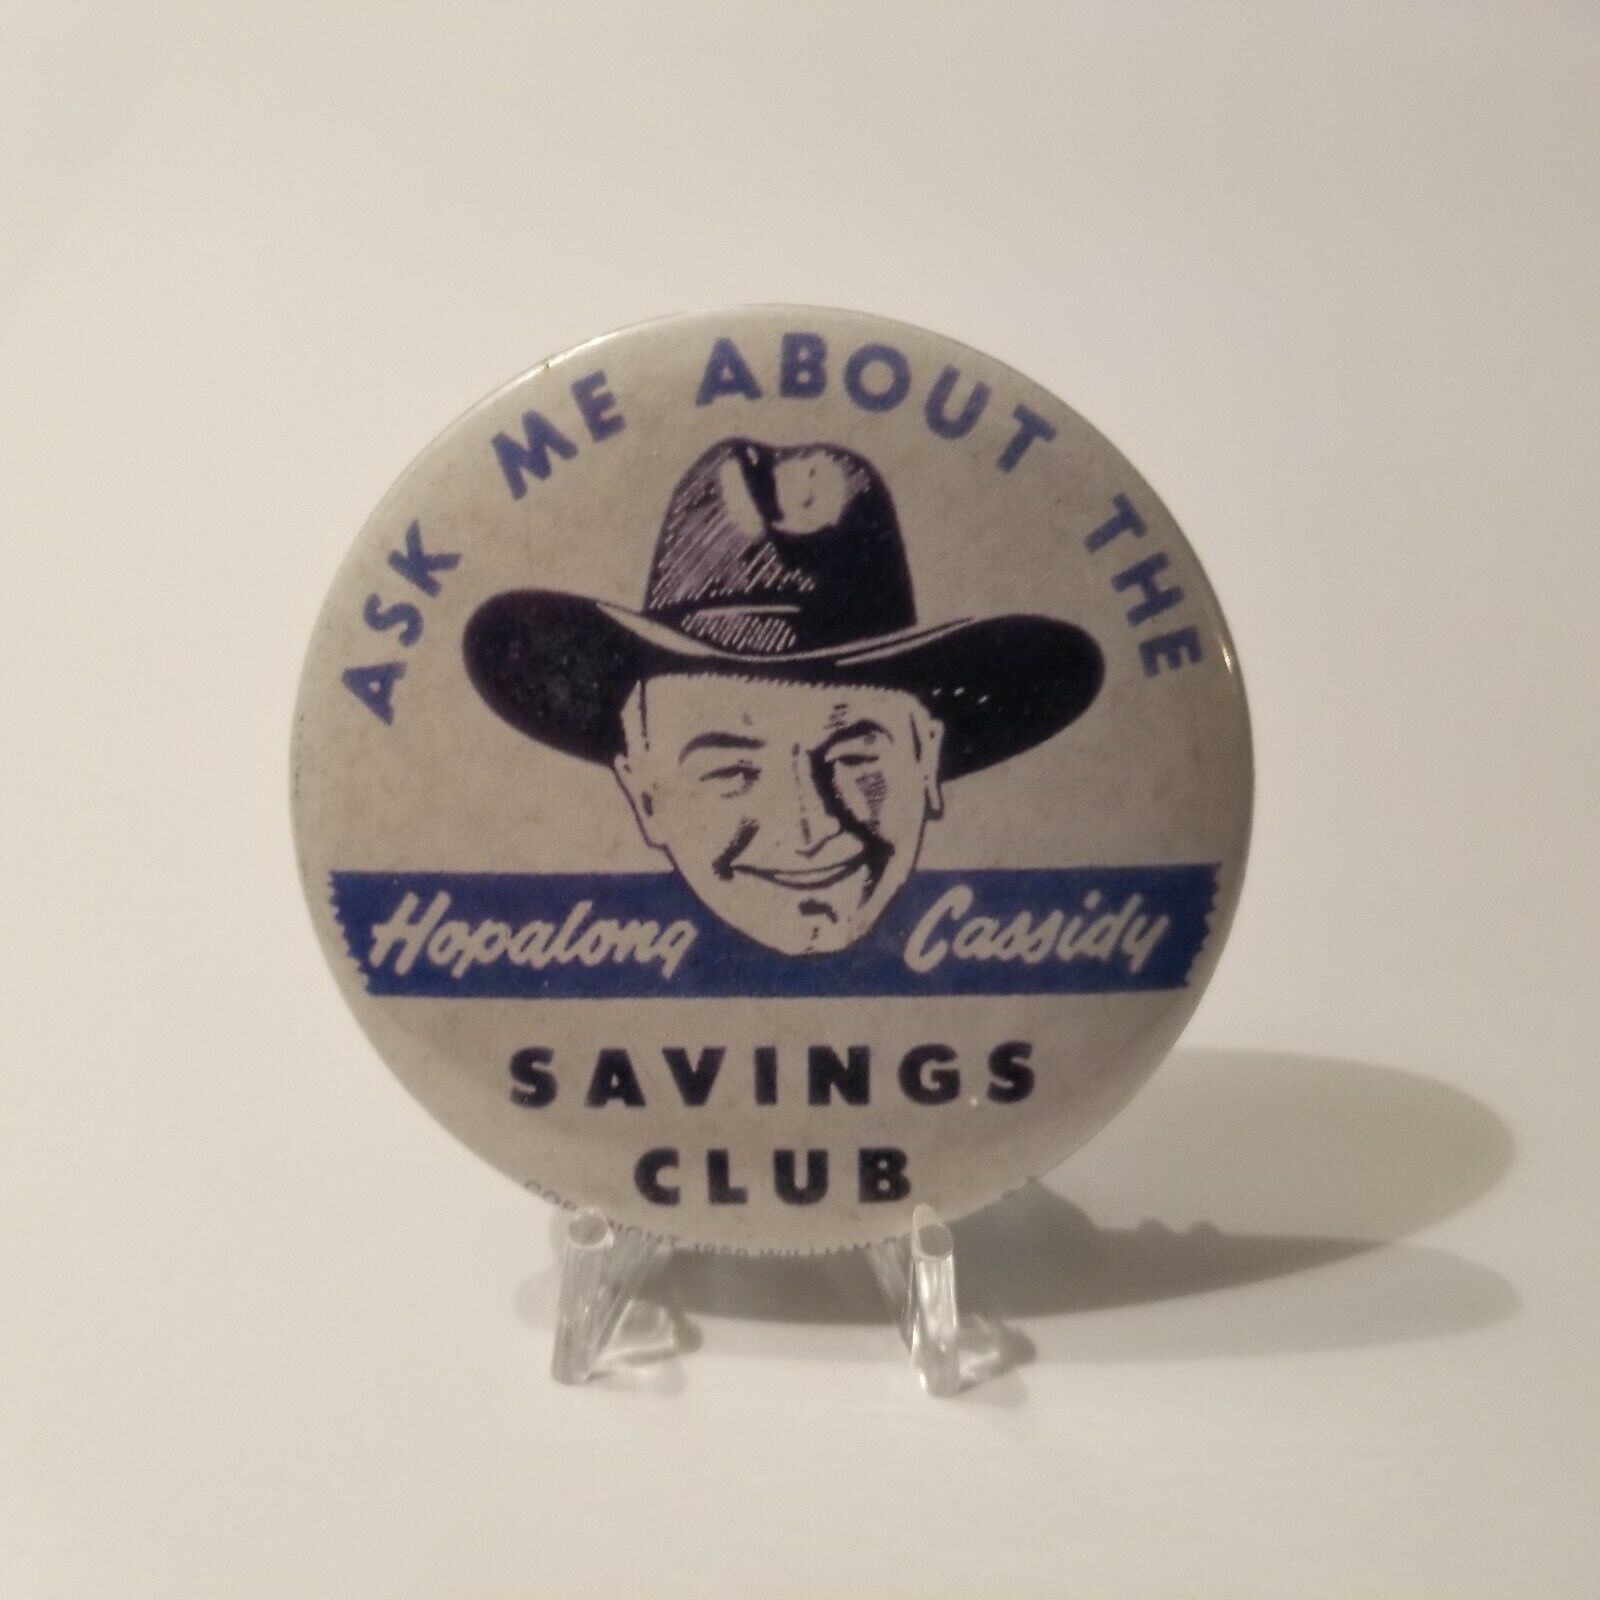 Primary image for Vintage Hopalong Cassidy Savings Club Bank Teller Button Badge Rare Blue